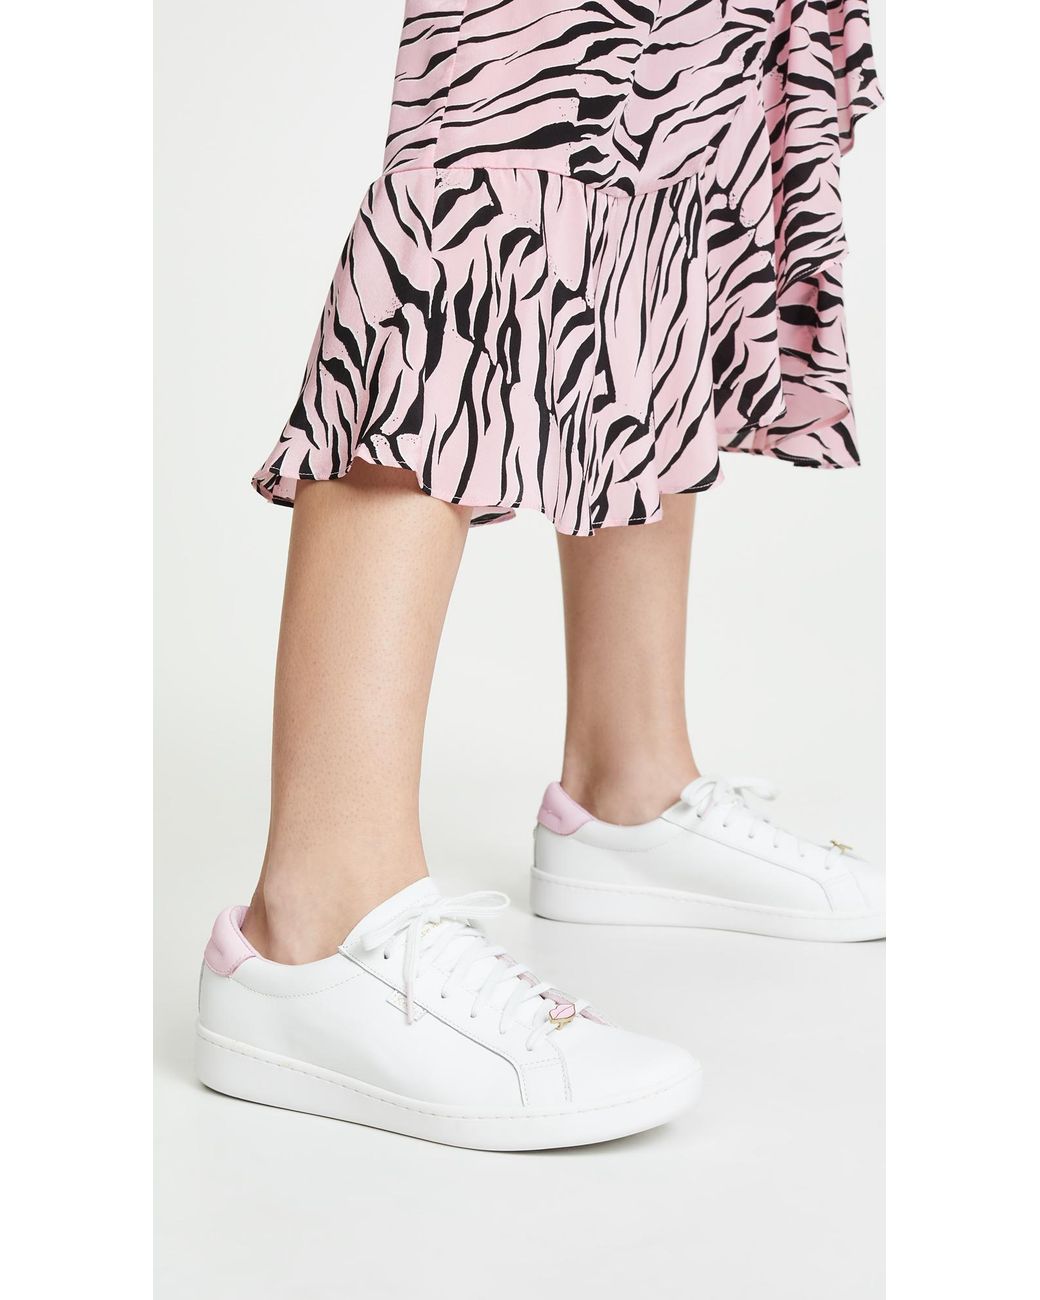 Keds X Kate Spade Ace Lips/hearts Sneakers in White | Lyst